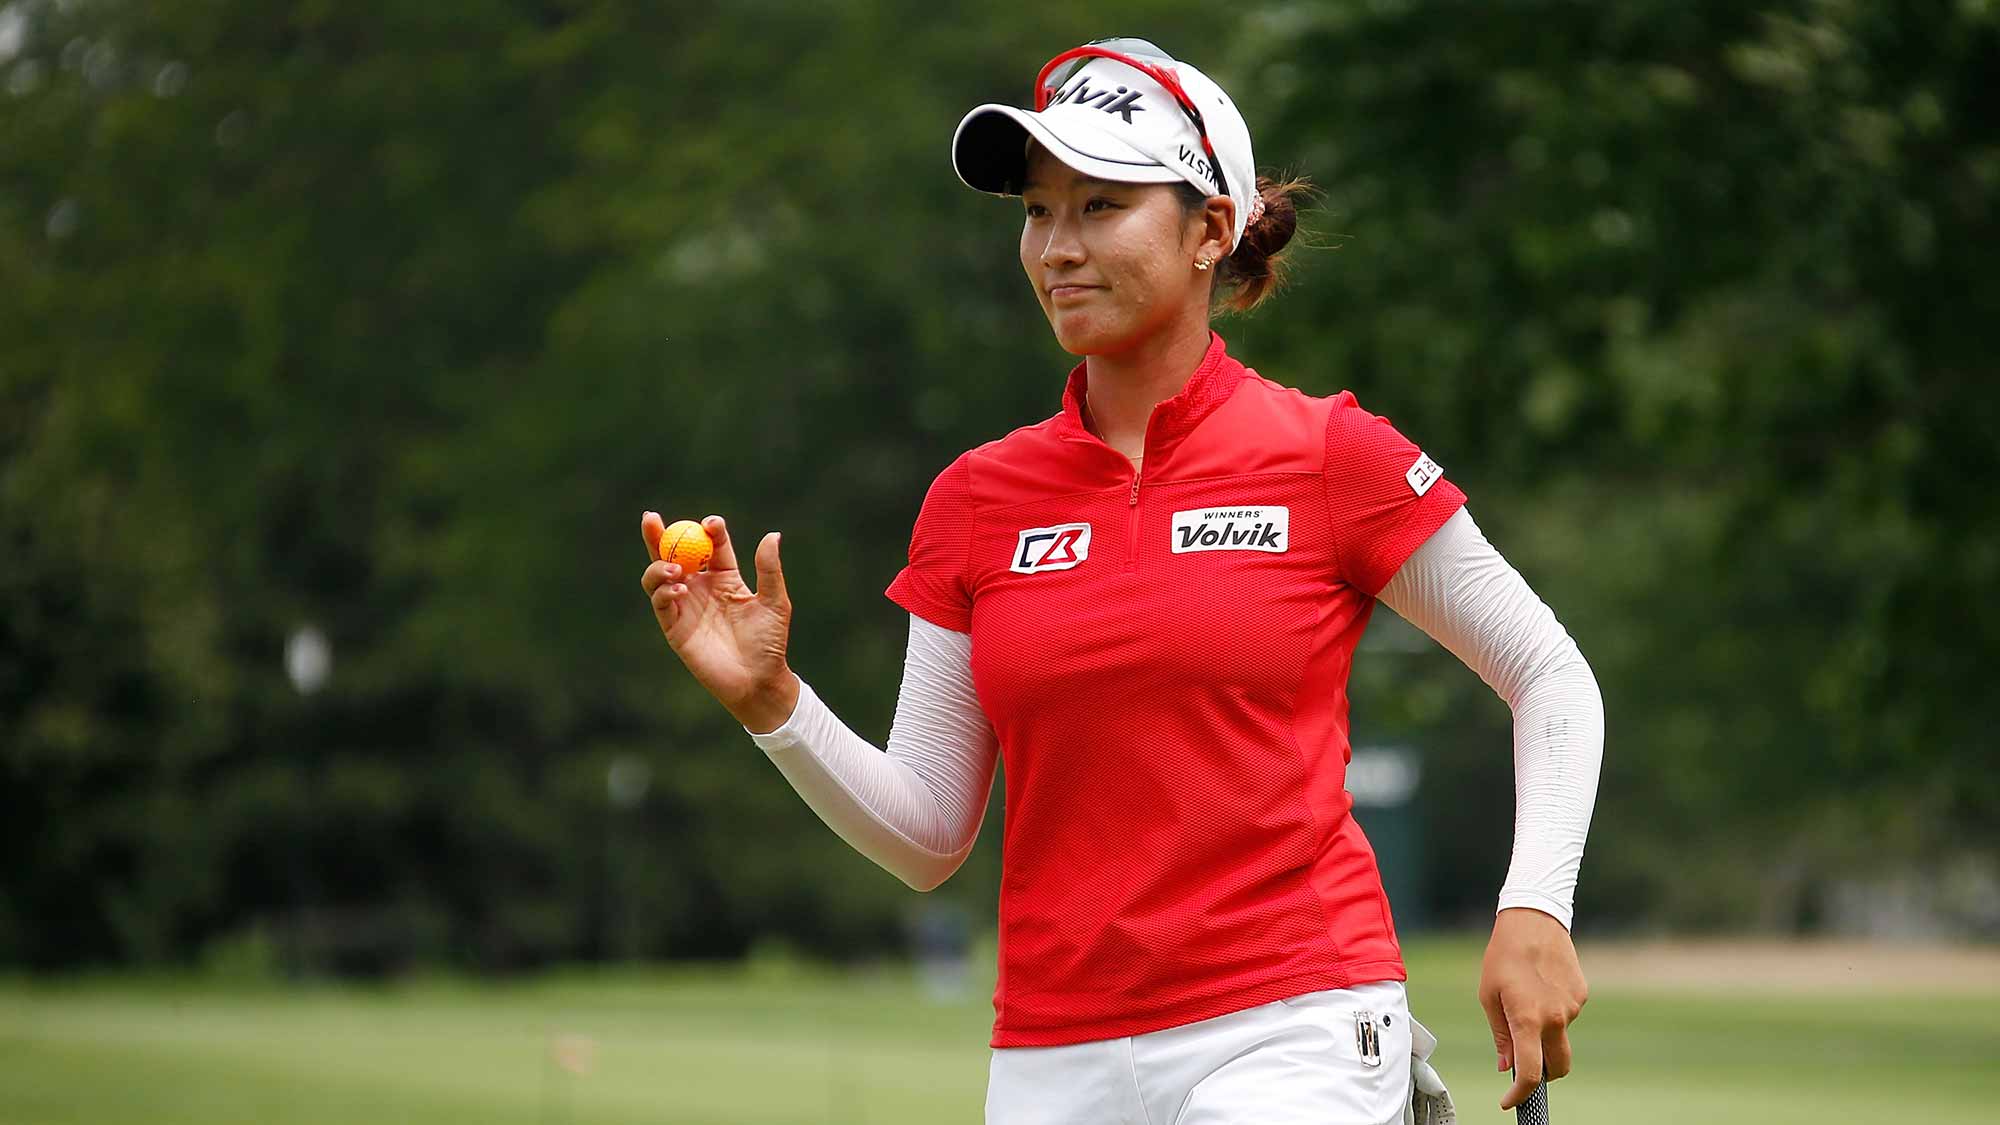 Chella Choi during the final round of Marathon Classic presented by Owens Corning & O-I